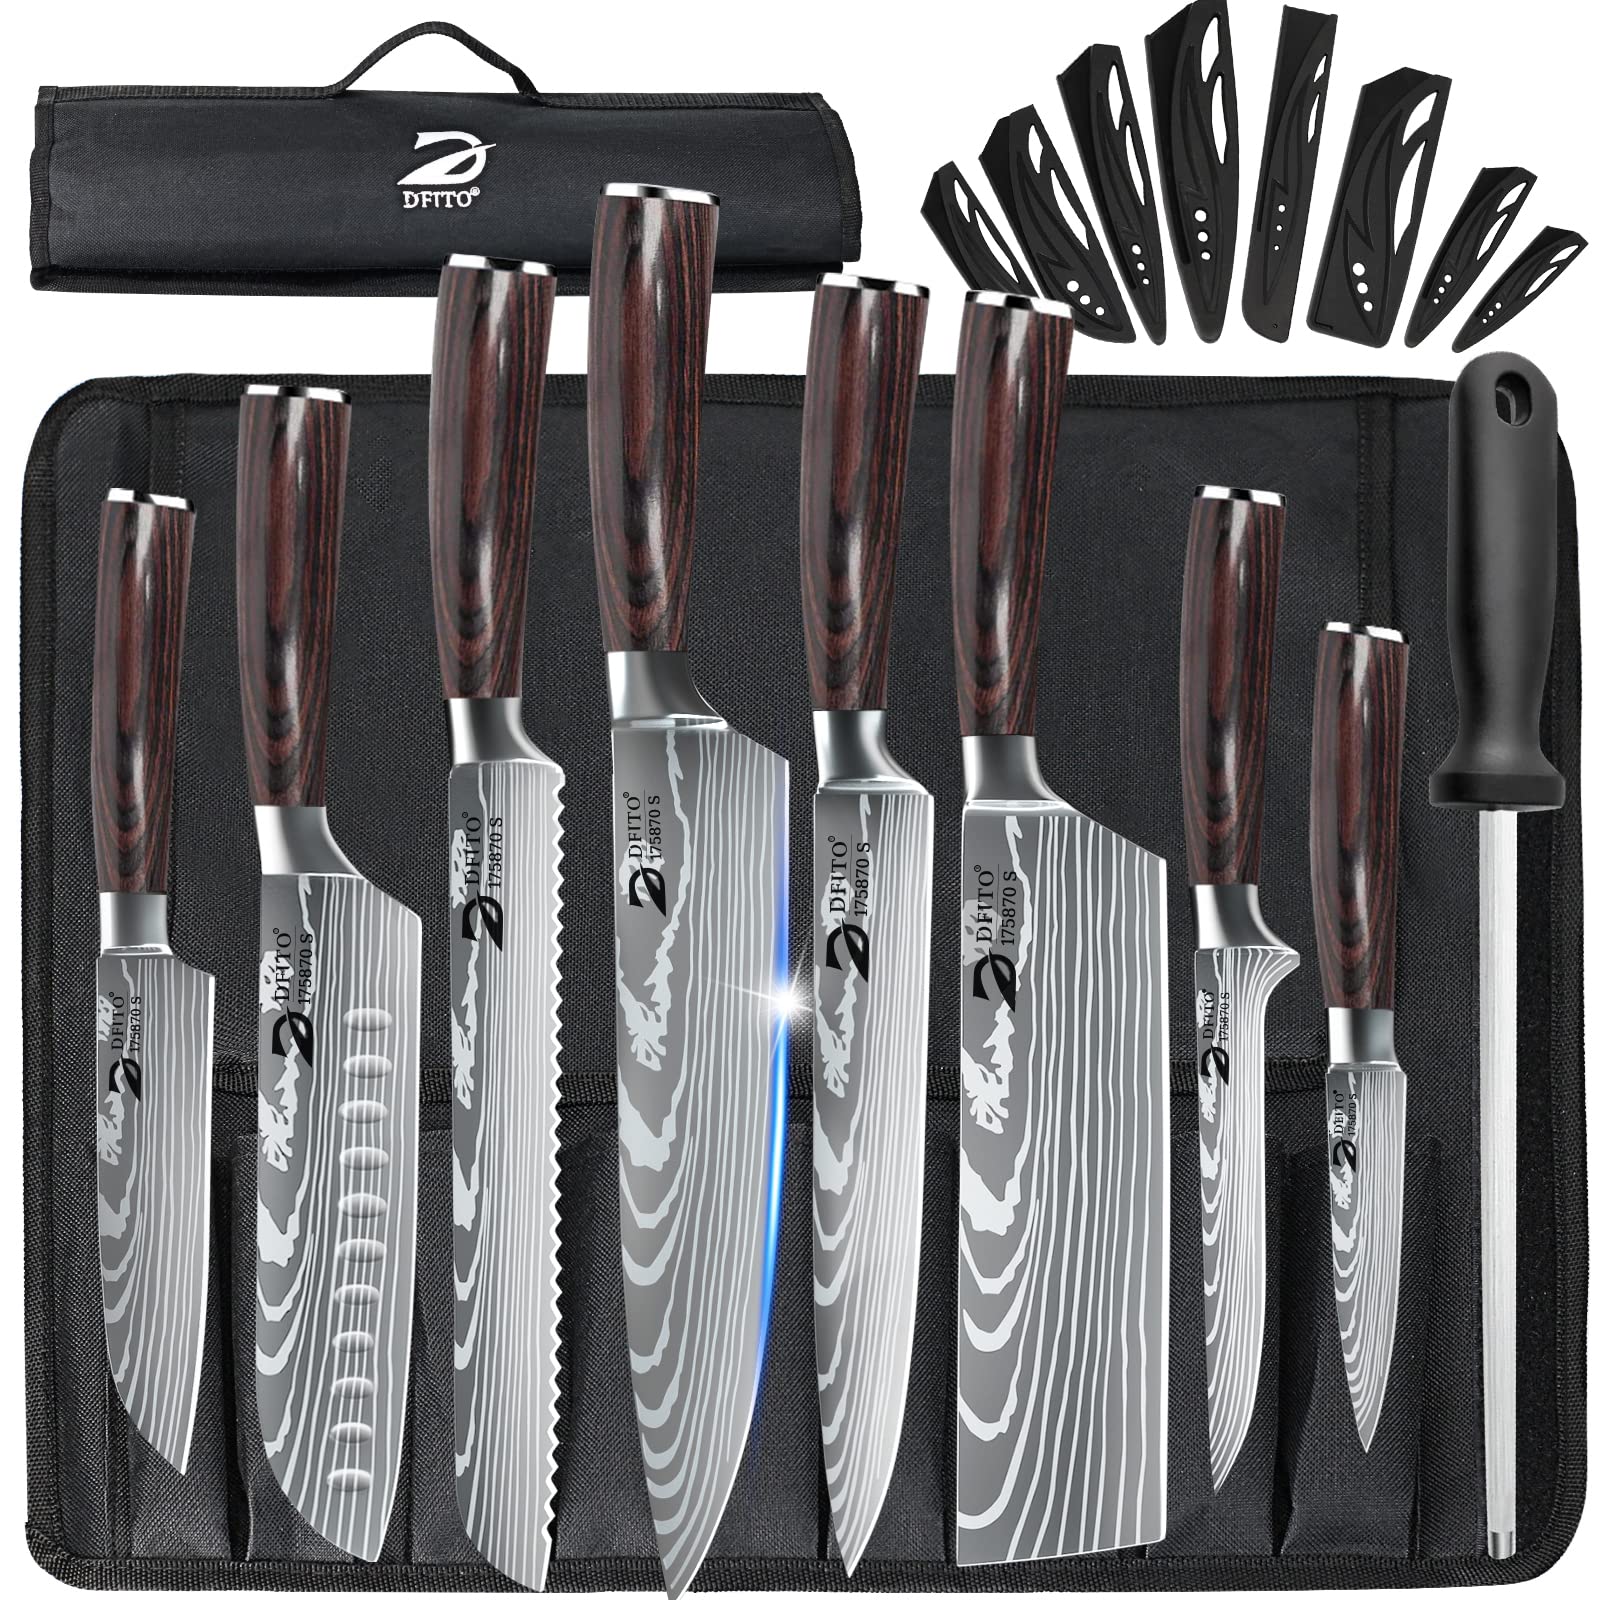 Dfito Chef Knife Sets with Roll Bag, 9 Pieces Professional Knife Set, High Carbon Stainless Steel Kitchen Chef Knife Set, Red Pakkawood Handle, Dishwasher Safe